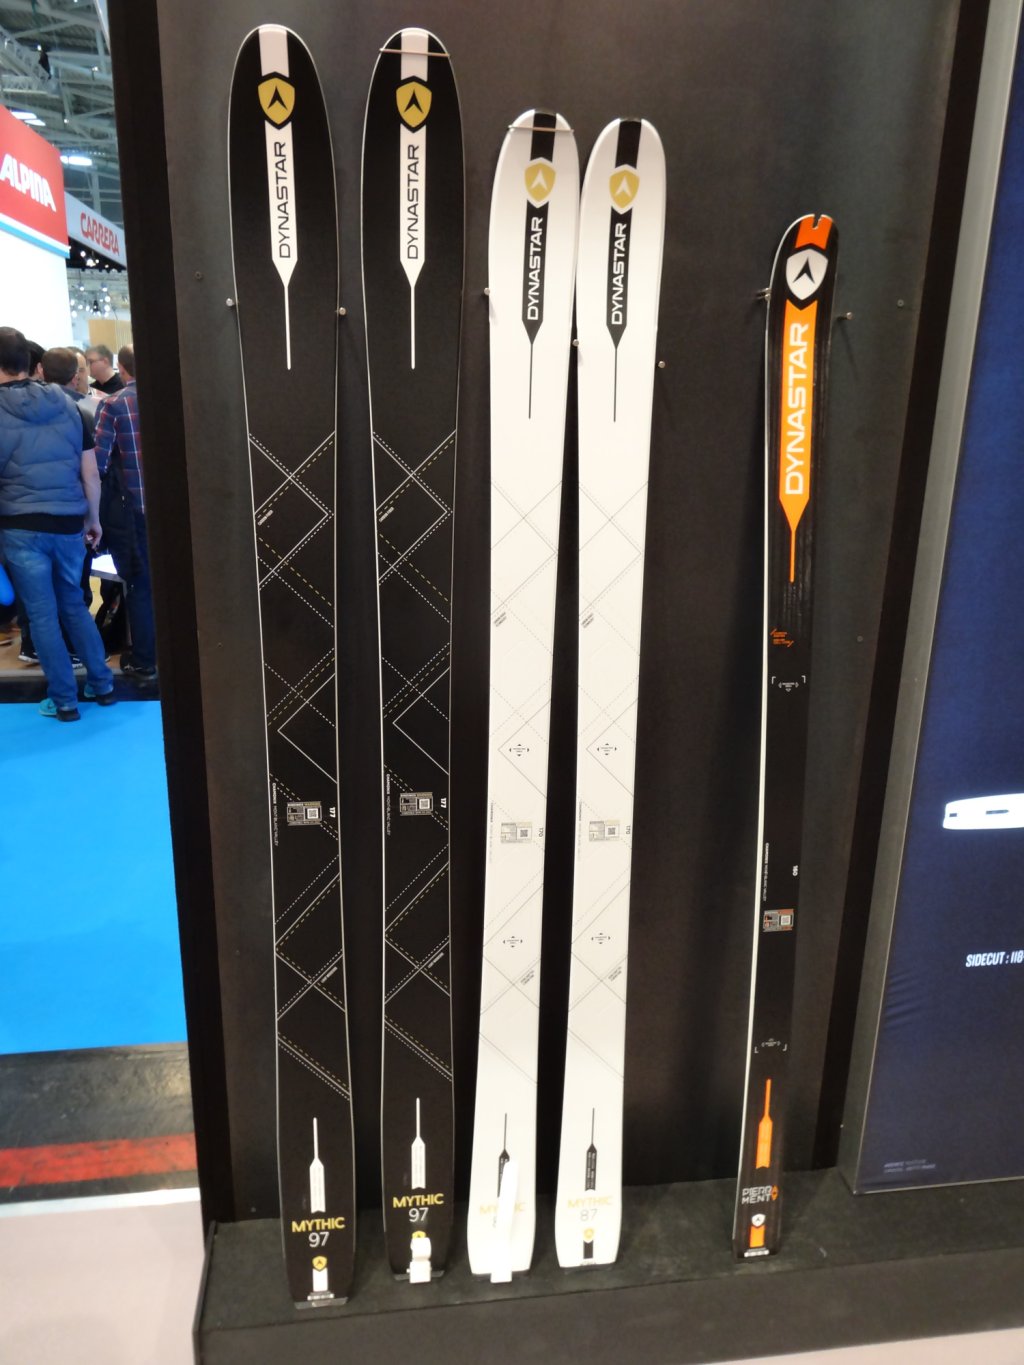 Dynastar touring skis with super-light wood core